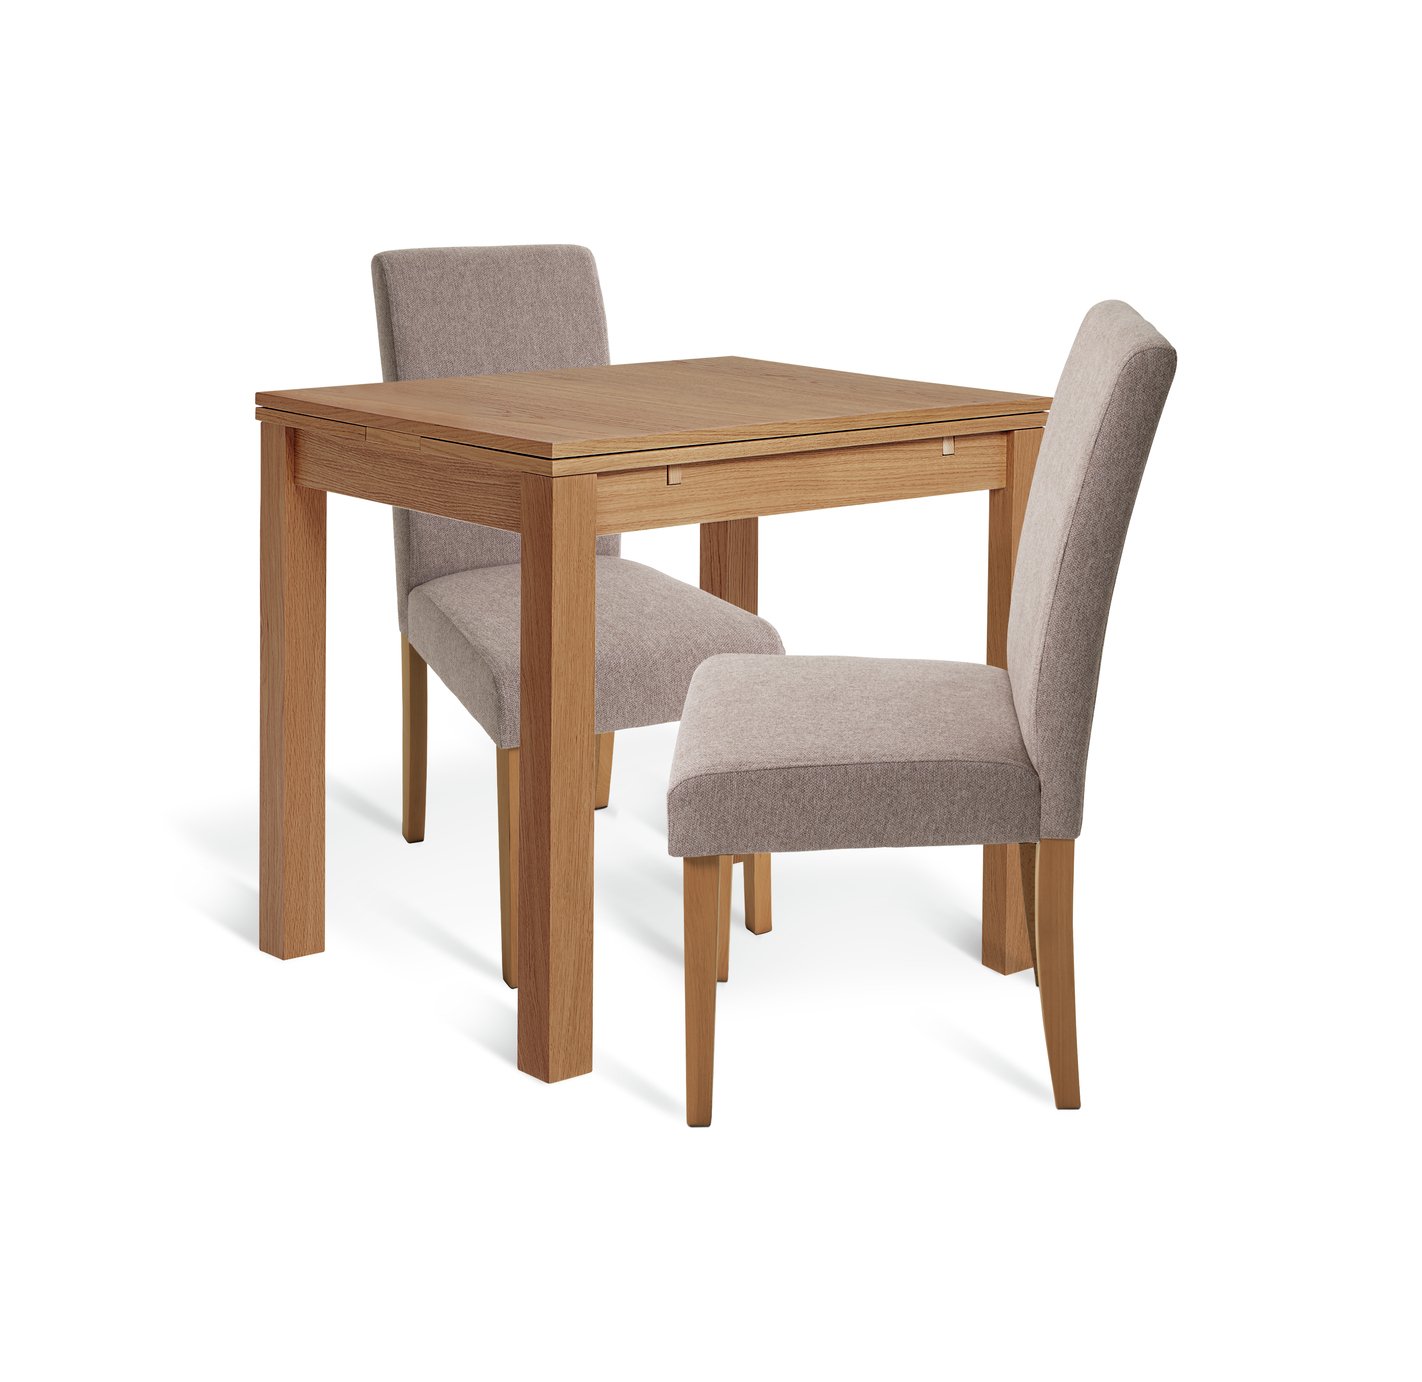 Habitat Clifton Wood Dining Table & 2 Brown Chairs